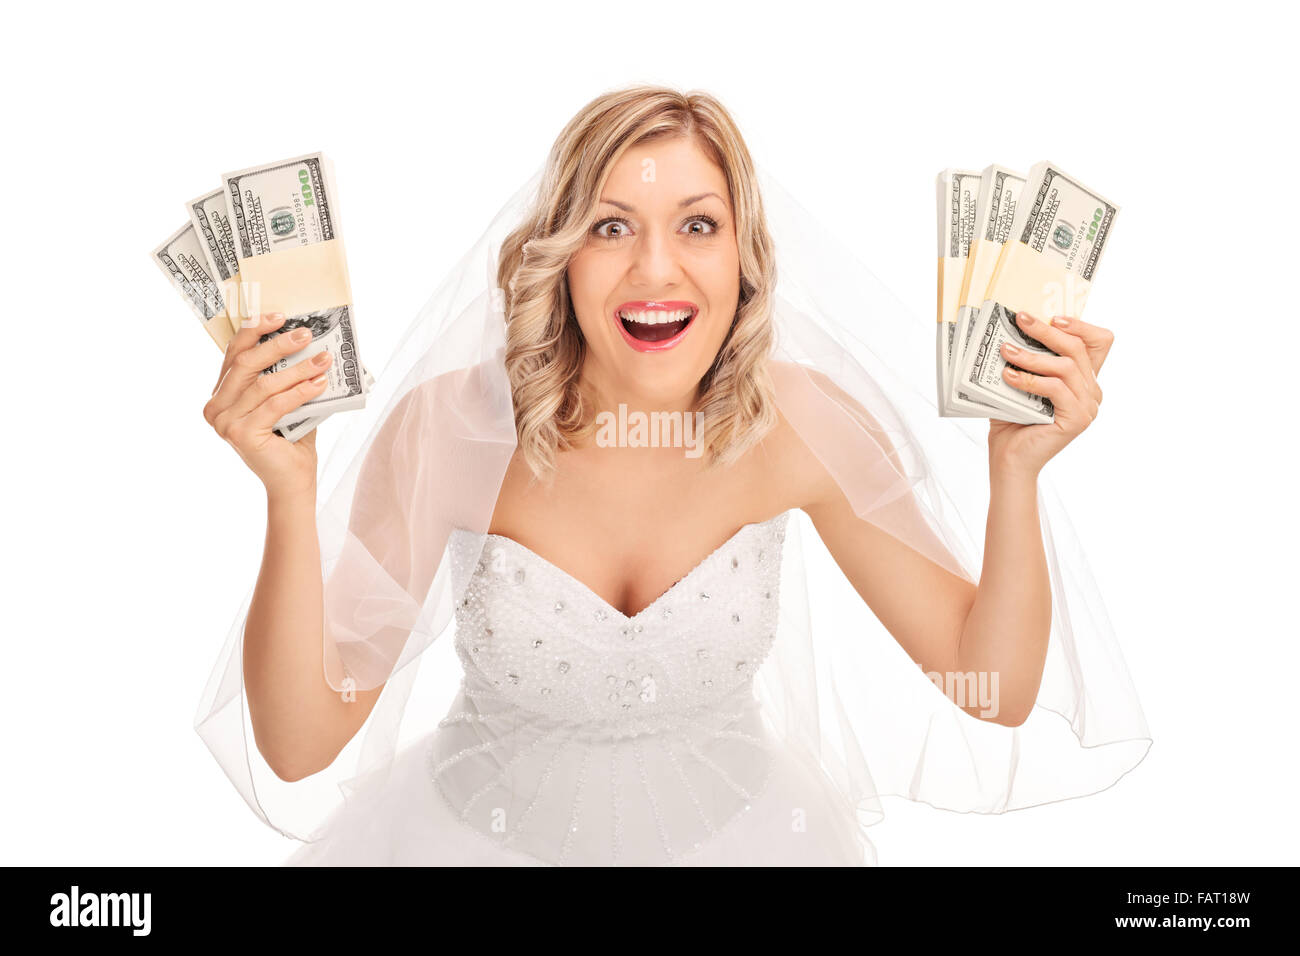 Young bride in a white wedding dress holding few stacks of money isolated on white background Stock Photo